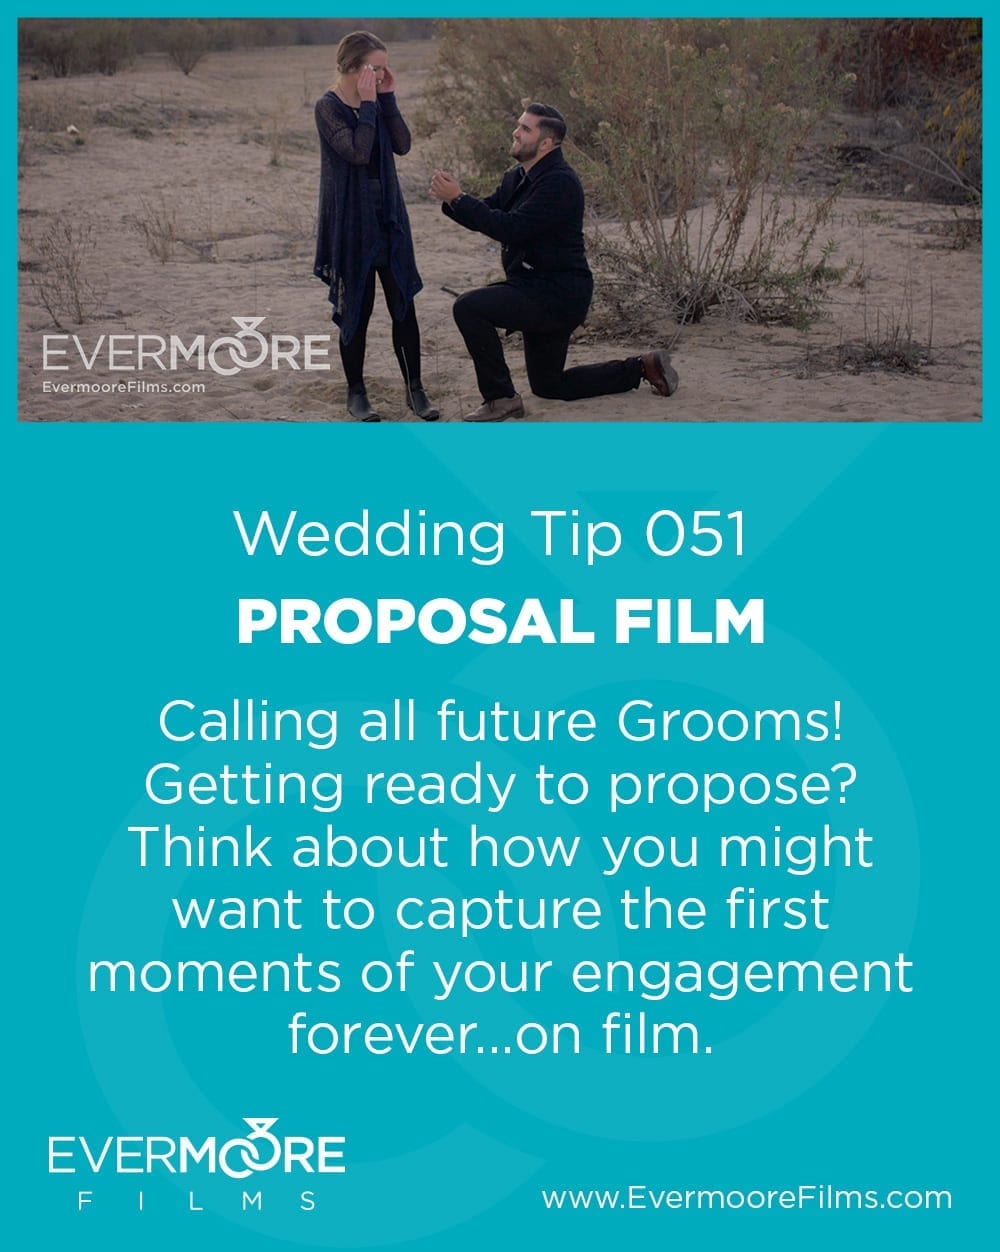 Proposal Film | Wedding Tip 051 | Evermoore Films | Calling all future Grooms! Getting ready to propose? Think about how you might want to capture the first moments of your engagement forever...on film.